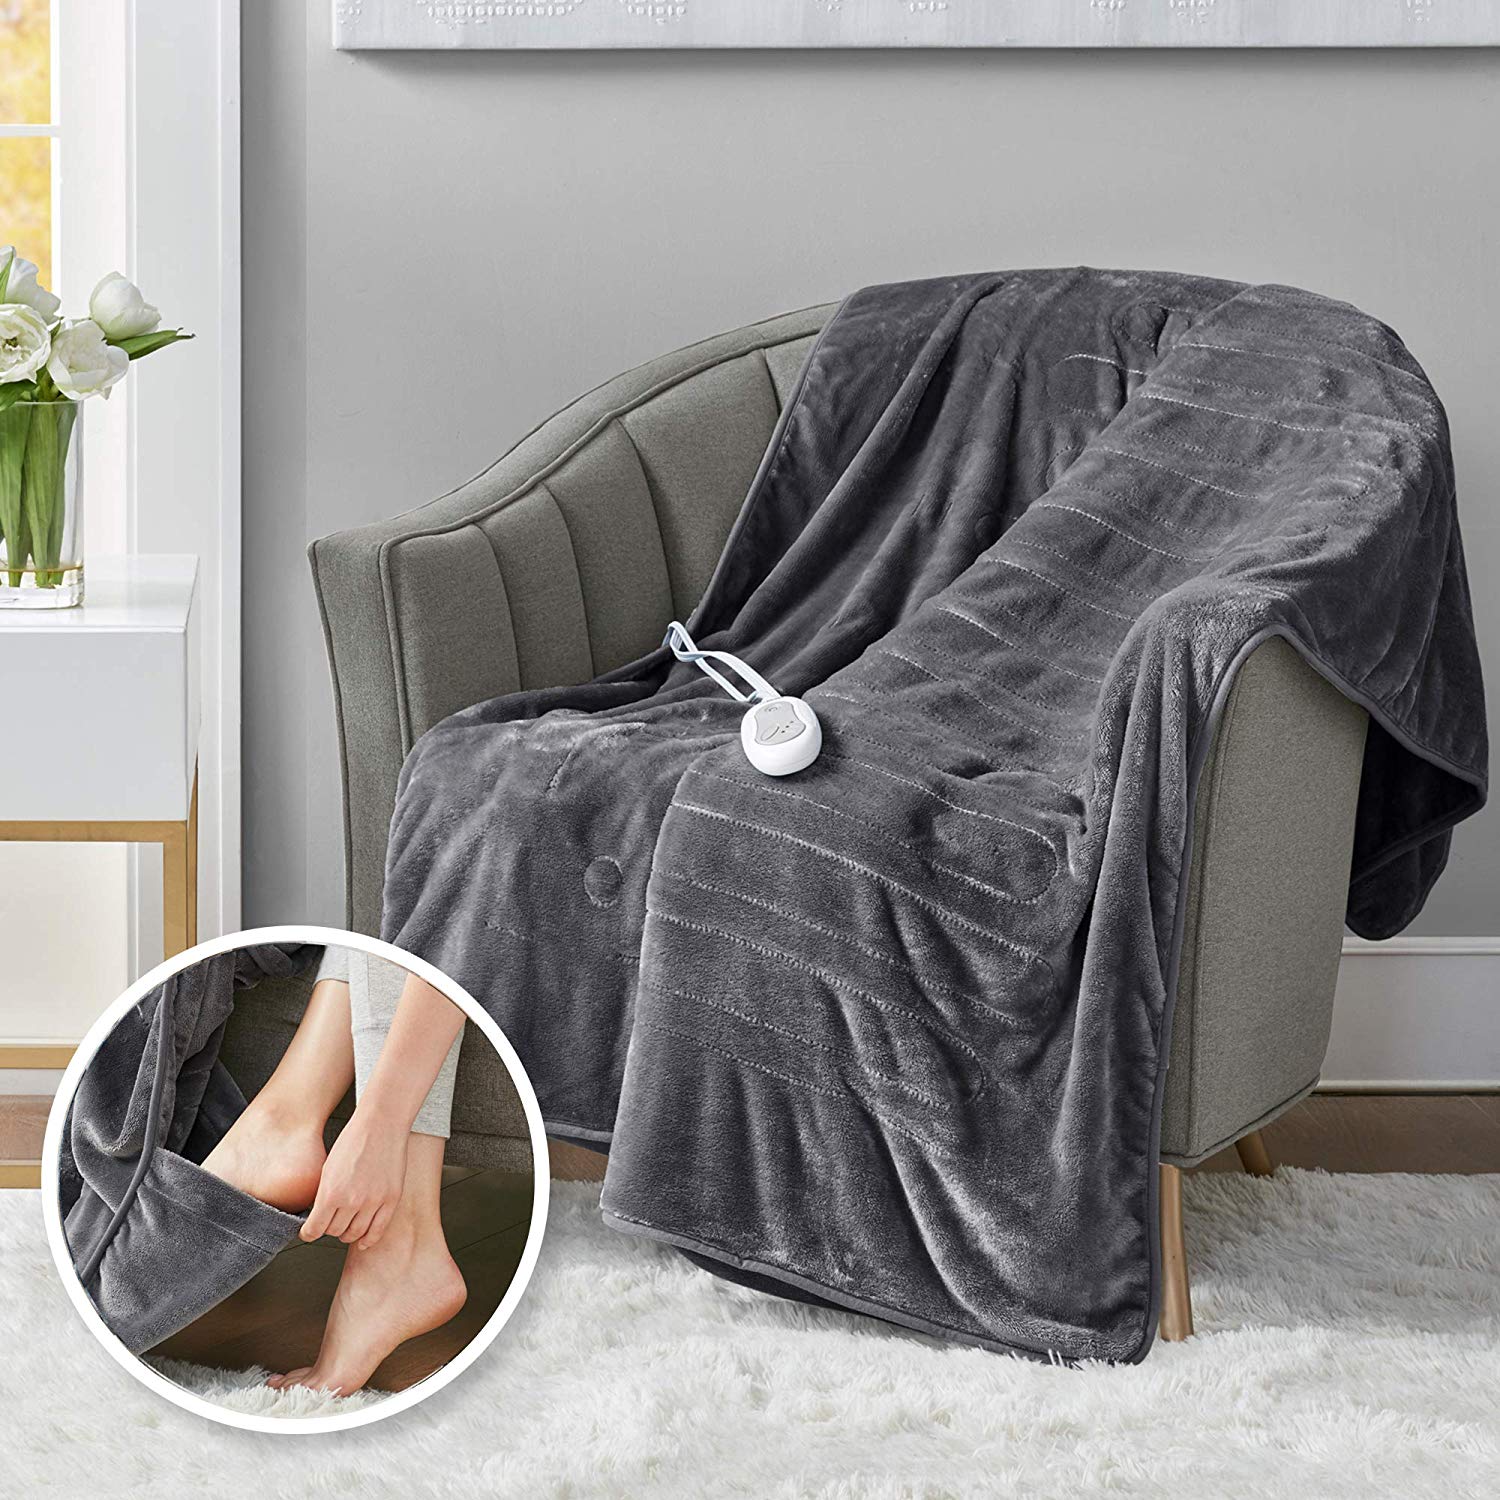 Heated blanket for chronic pain -- soft plush with foot pockets.